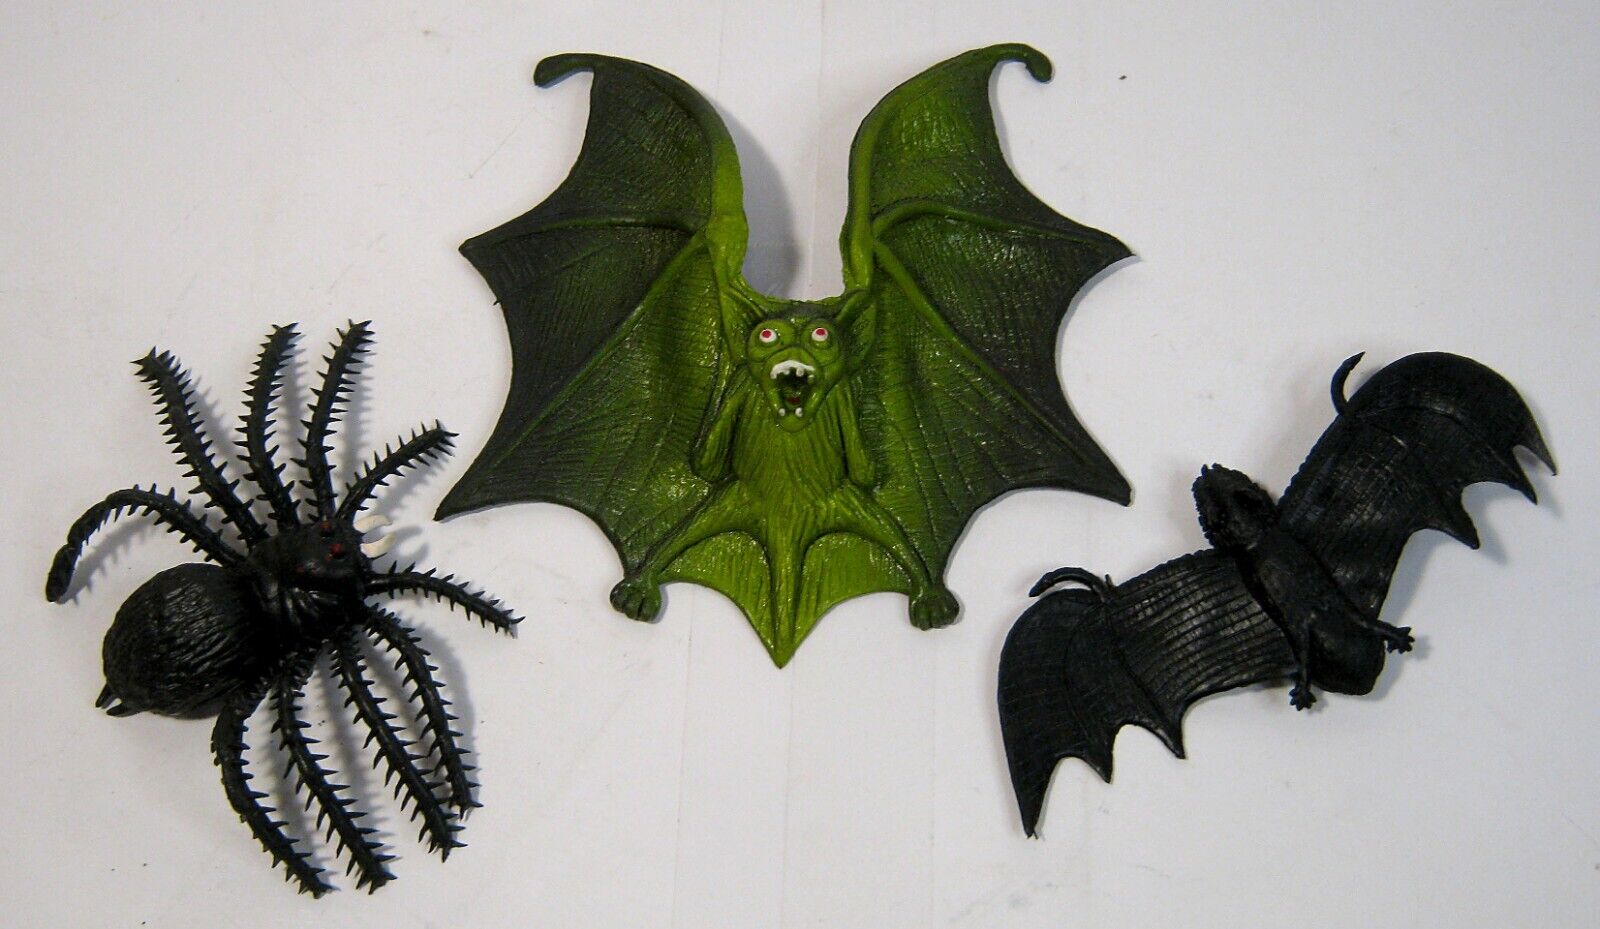 Vintage 1980/90s Mixed Lot of 3 Rubber Halloween Decorations Bats & Spider